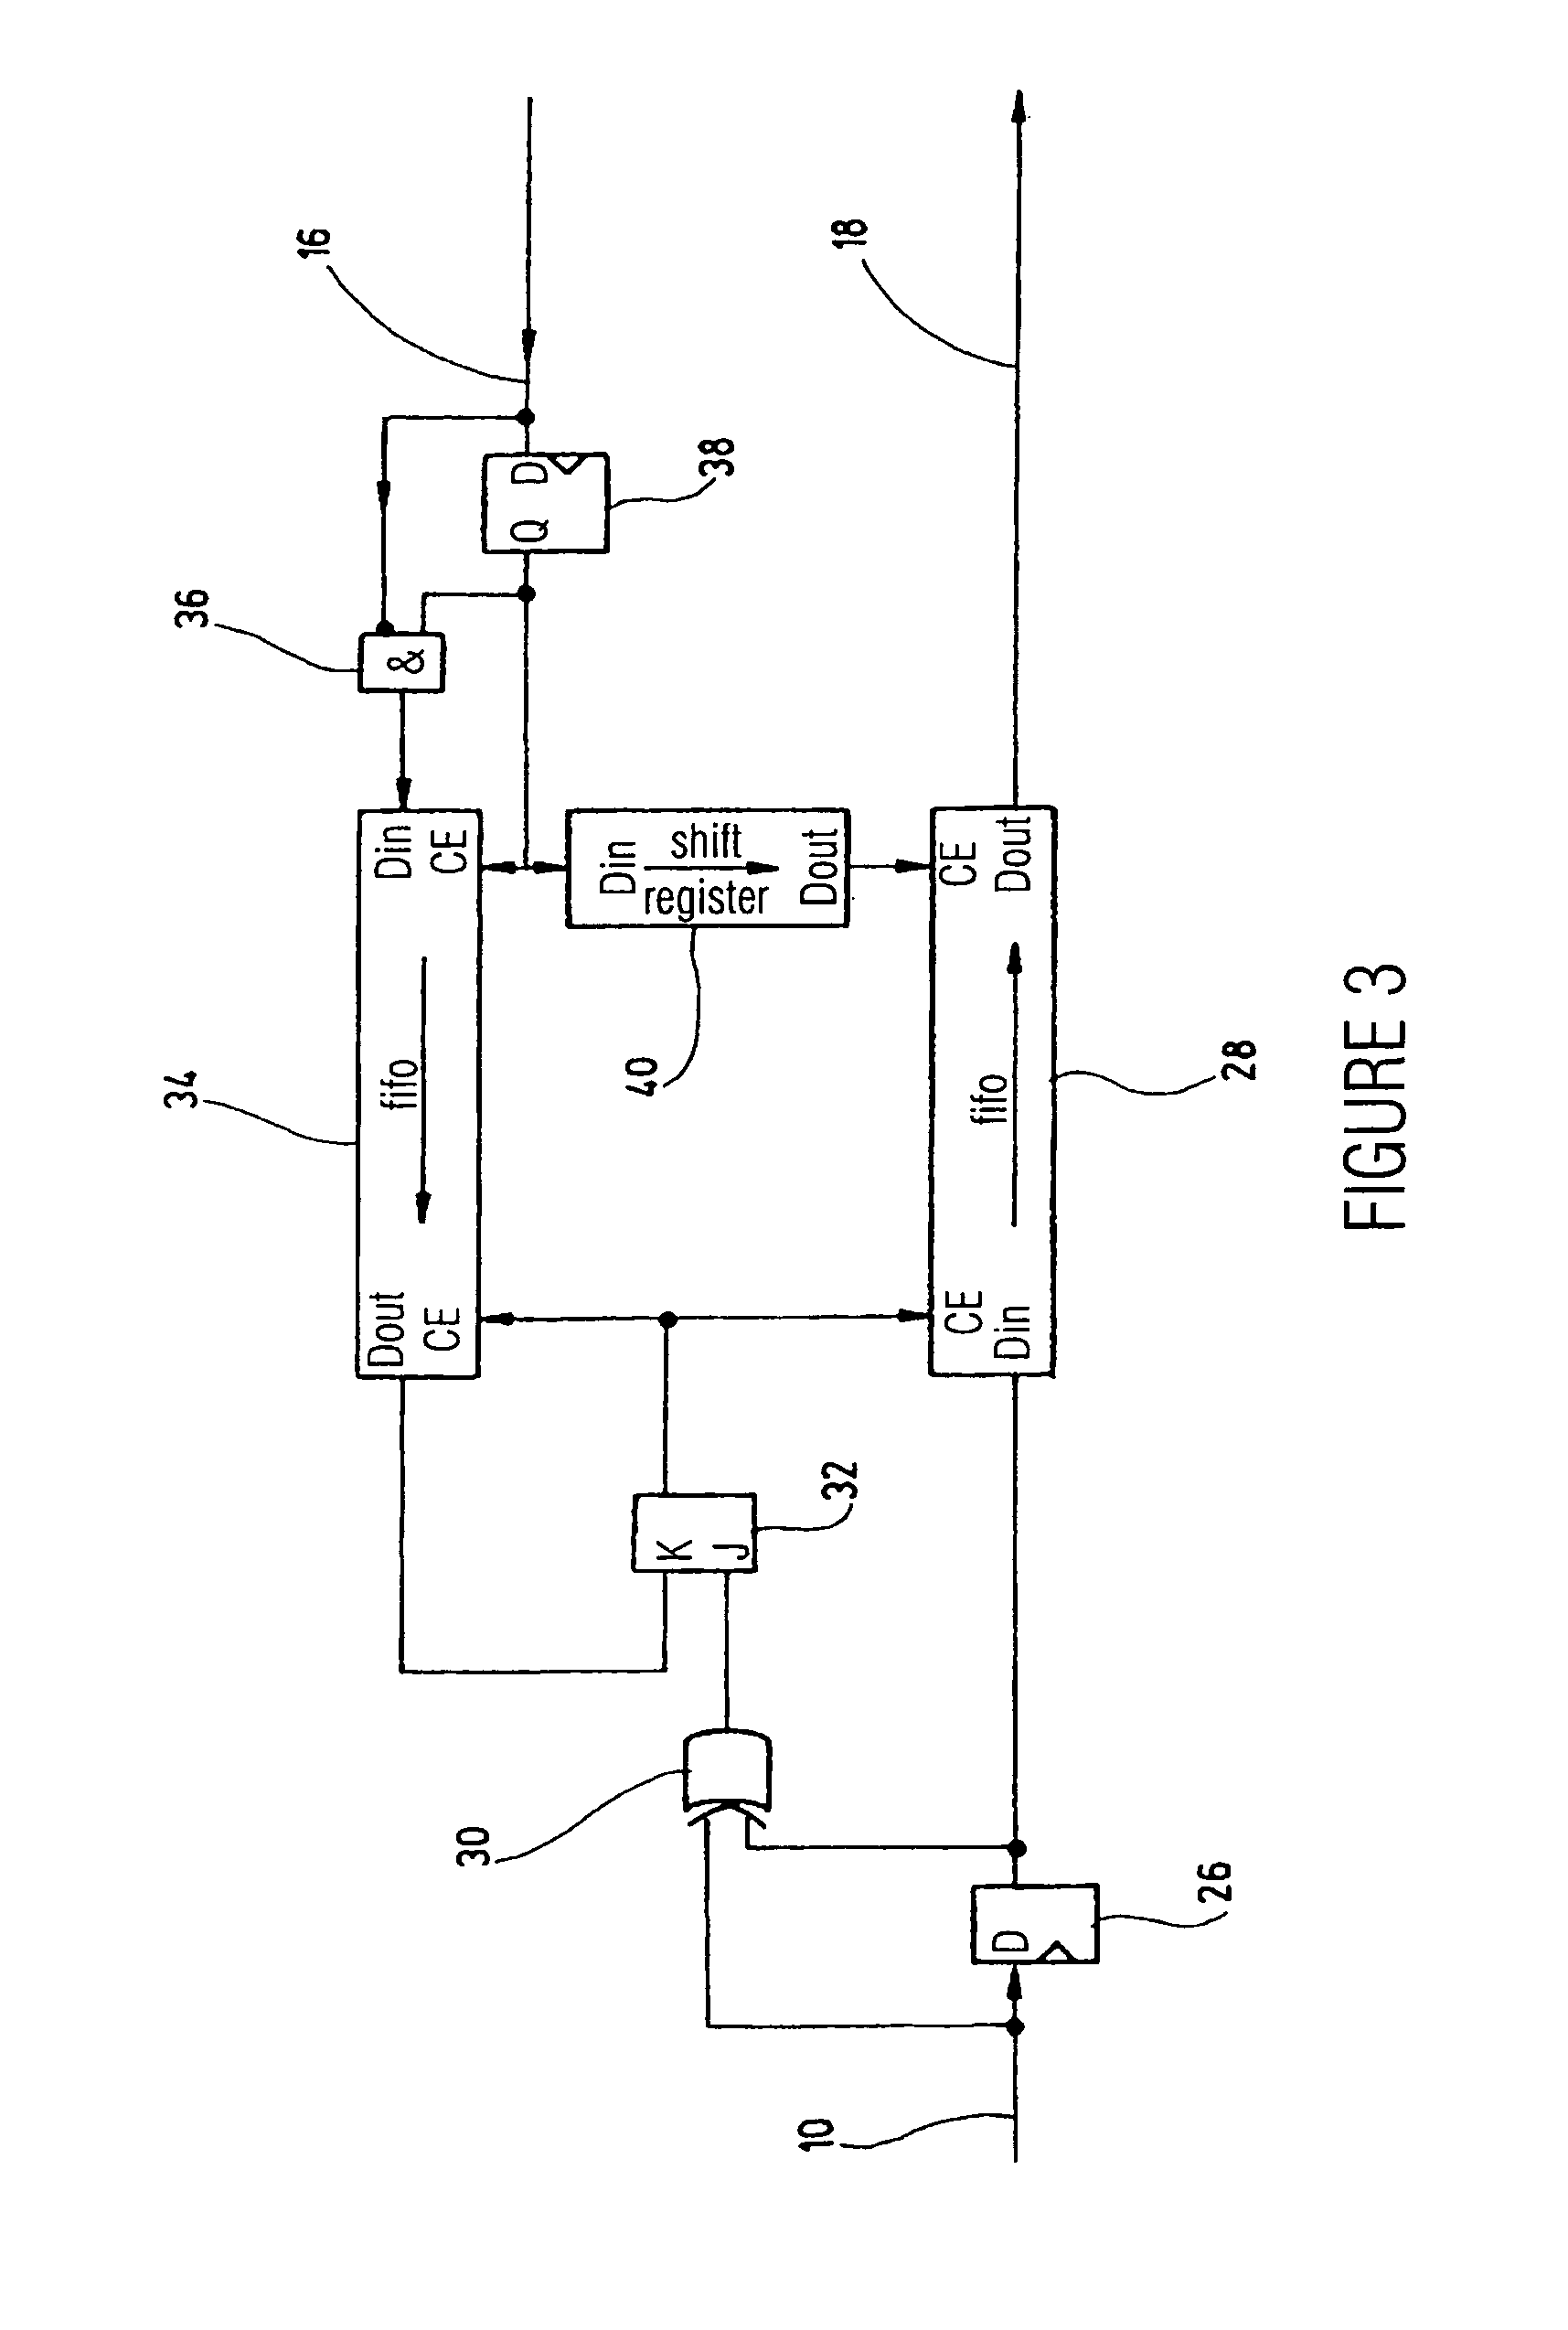 Method and apparatus for adjusting transitions in a bit stream